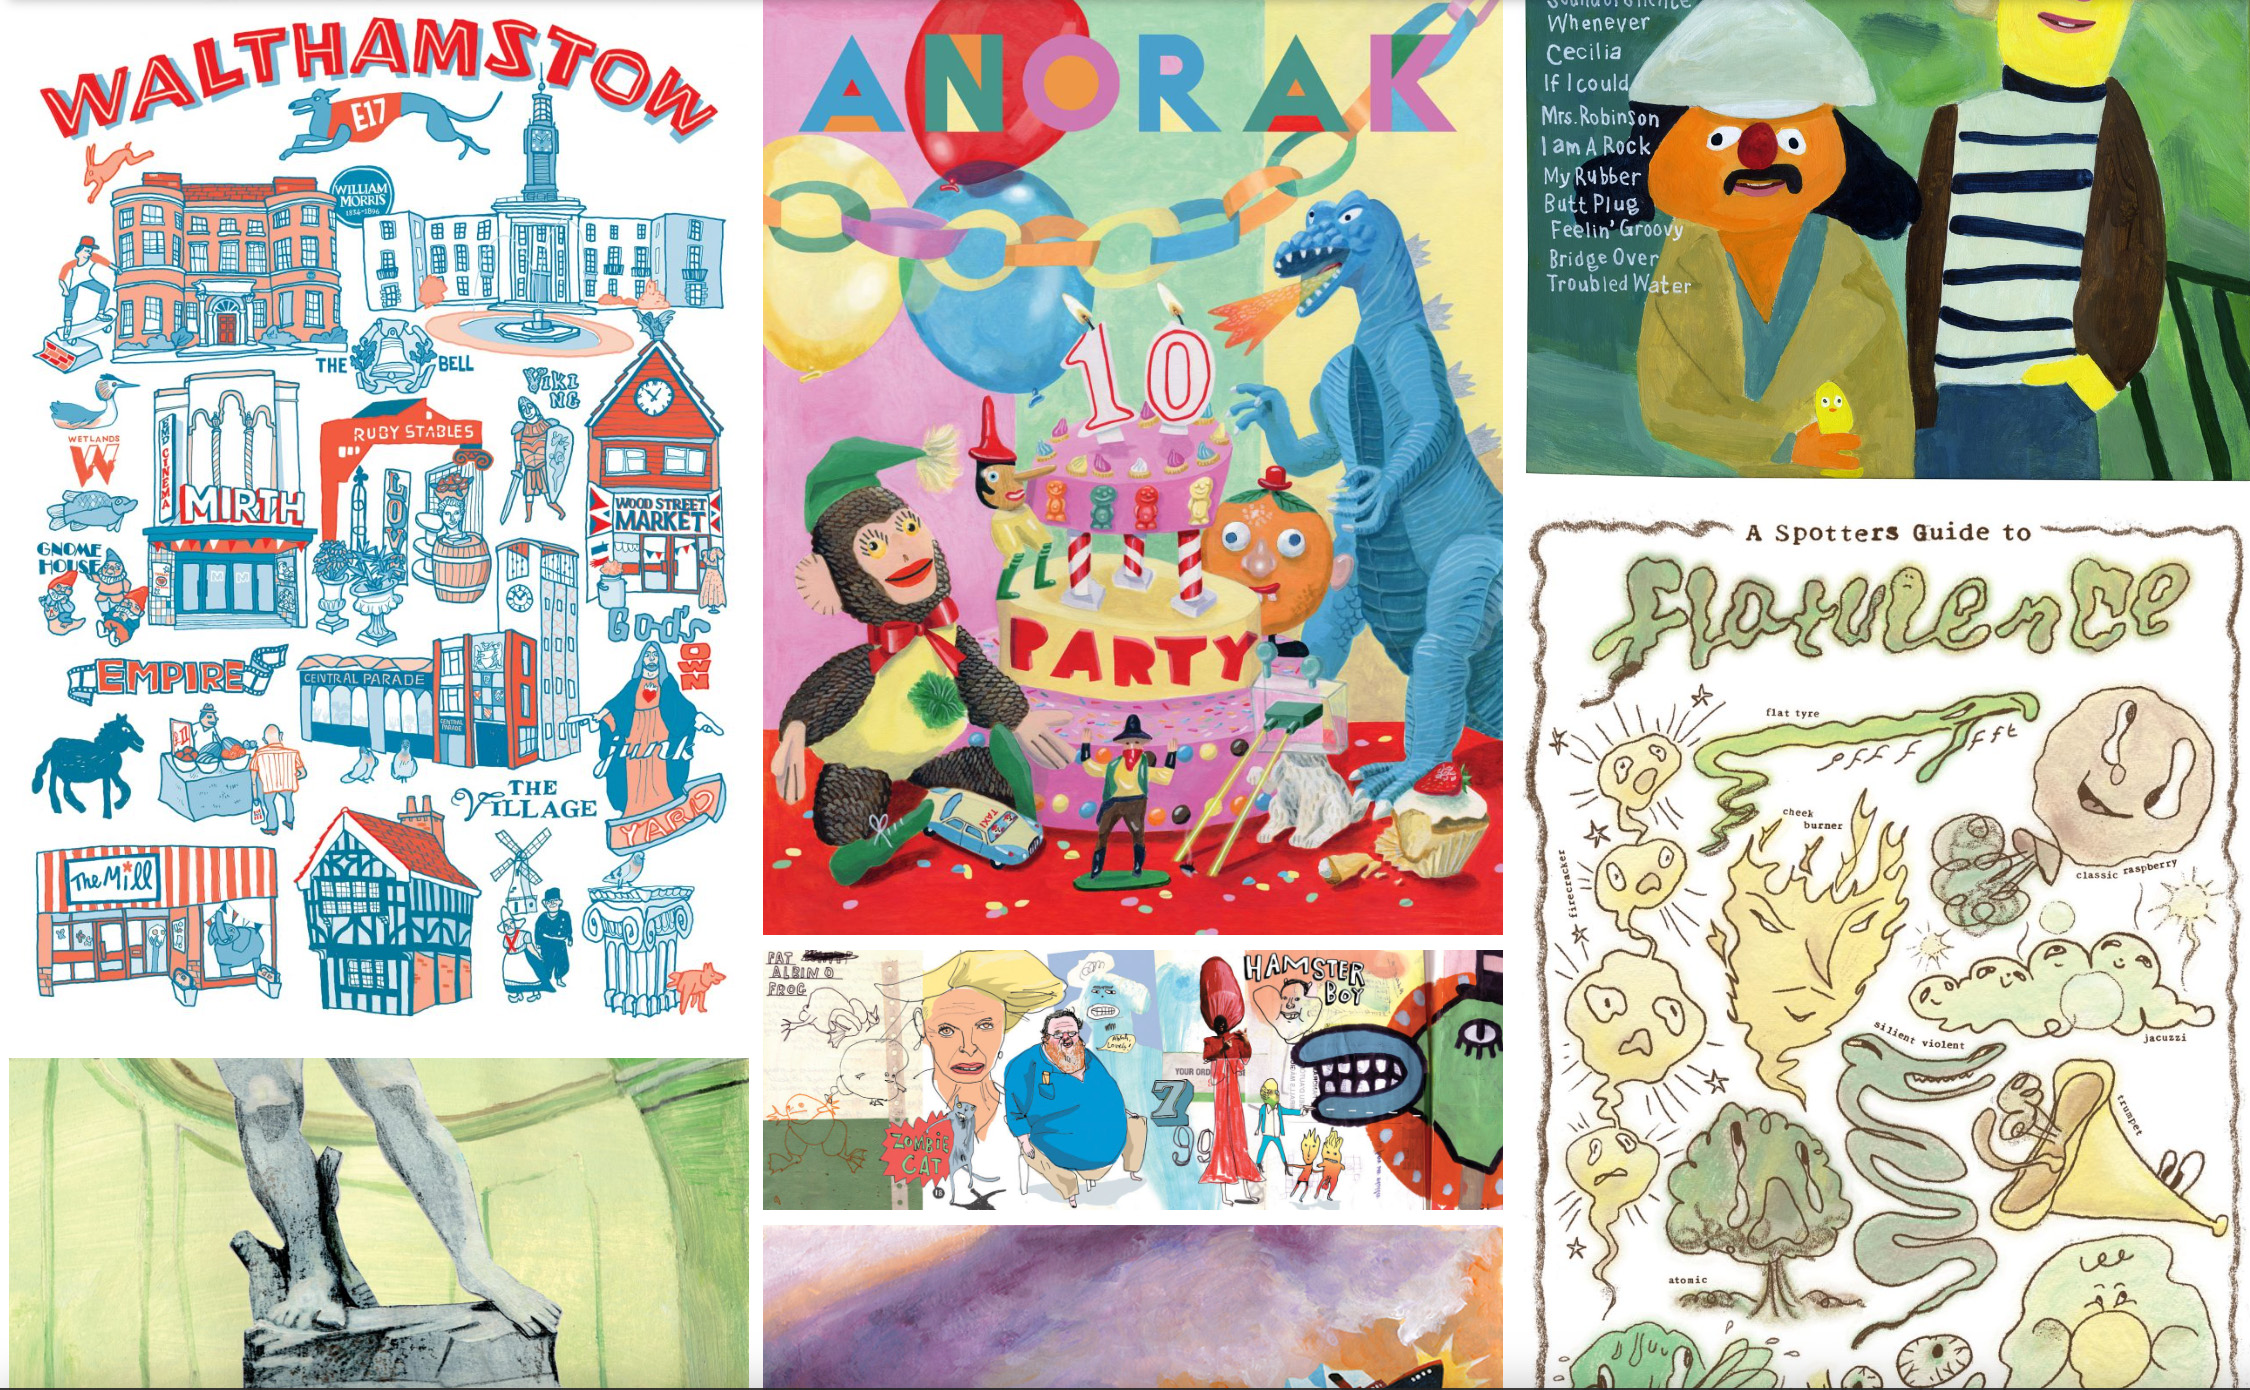 A group of 7 illustrations including a poster of illustrated buildings in Walthamstow, a brightly coloured children's party with children's toys gathered around a cake and a green illustrated poster design 'A Spotters Guide to Flatulence' by Adam Graff